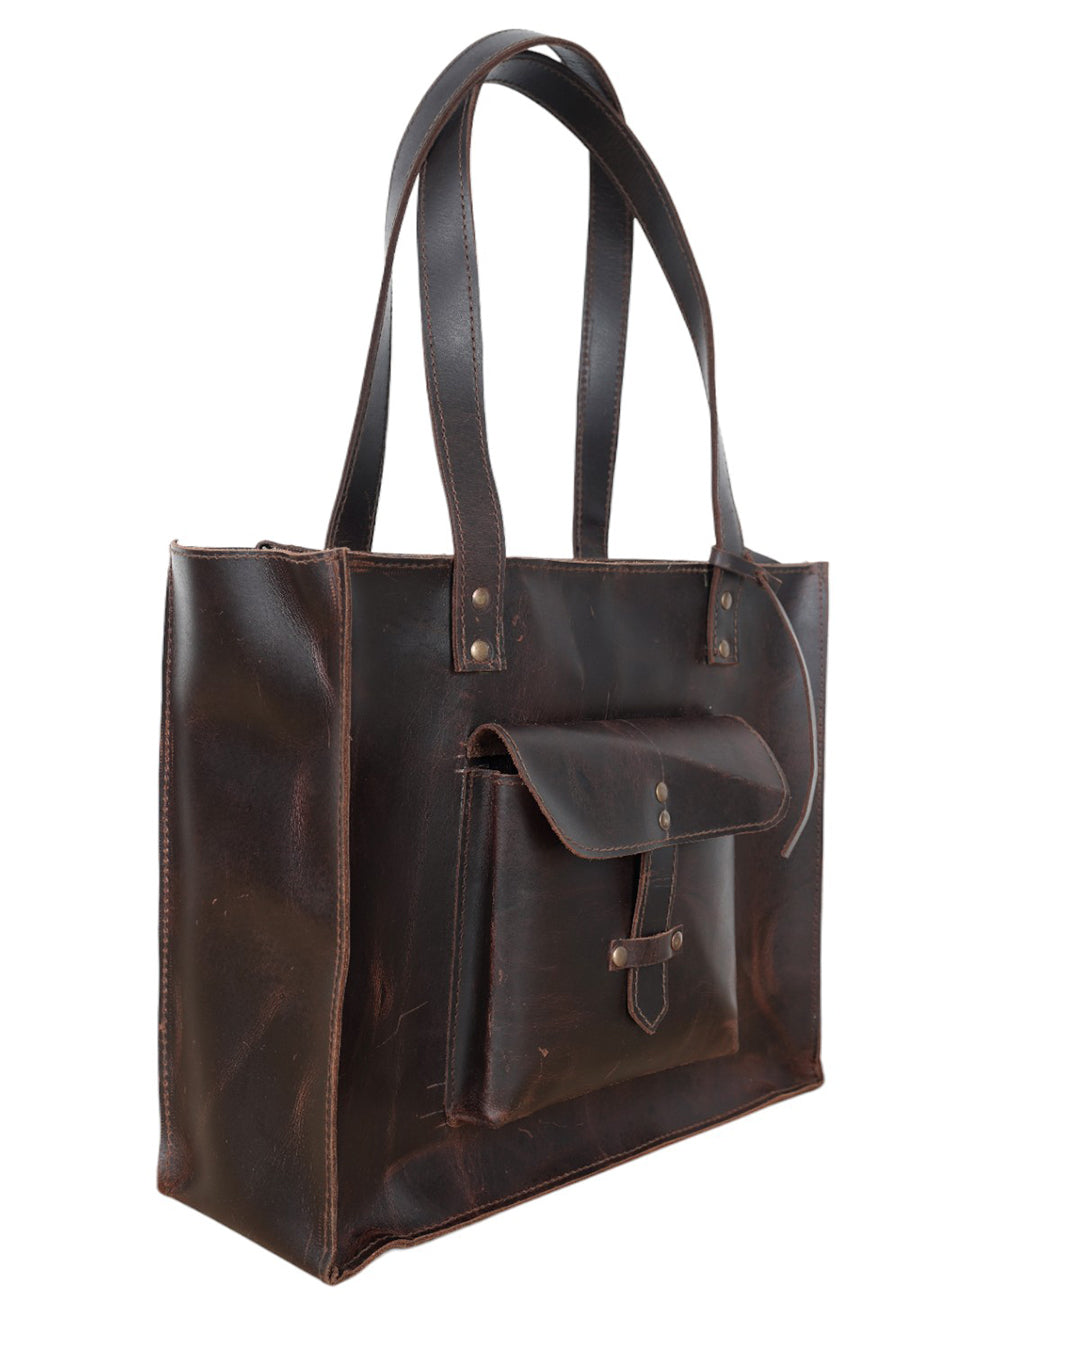 Tote Bag with Laptop Pocket